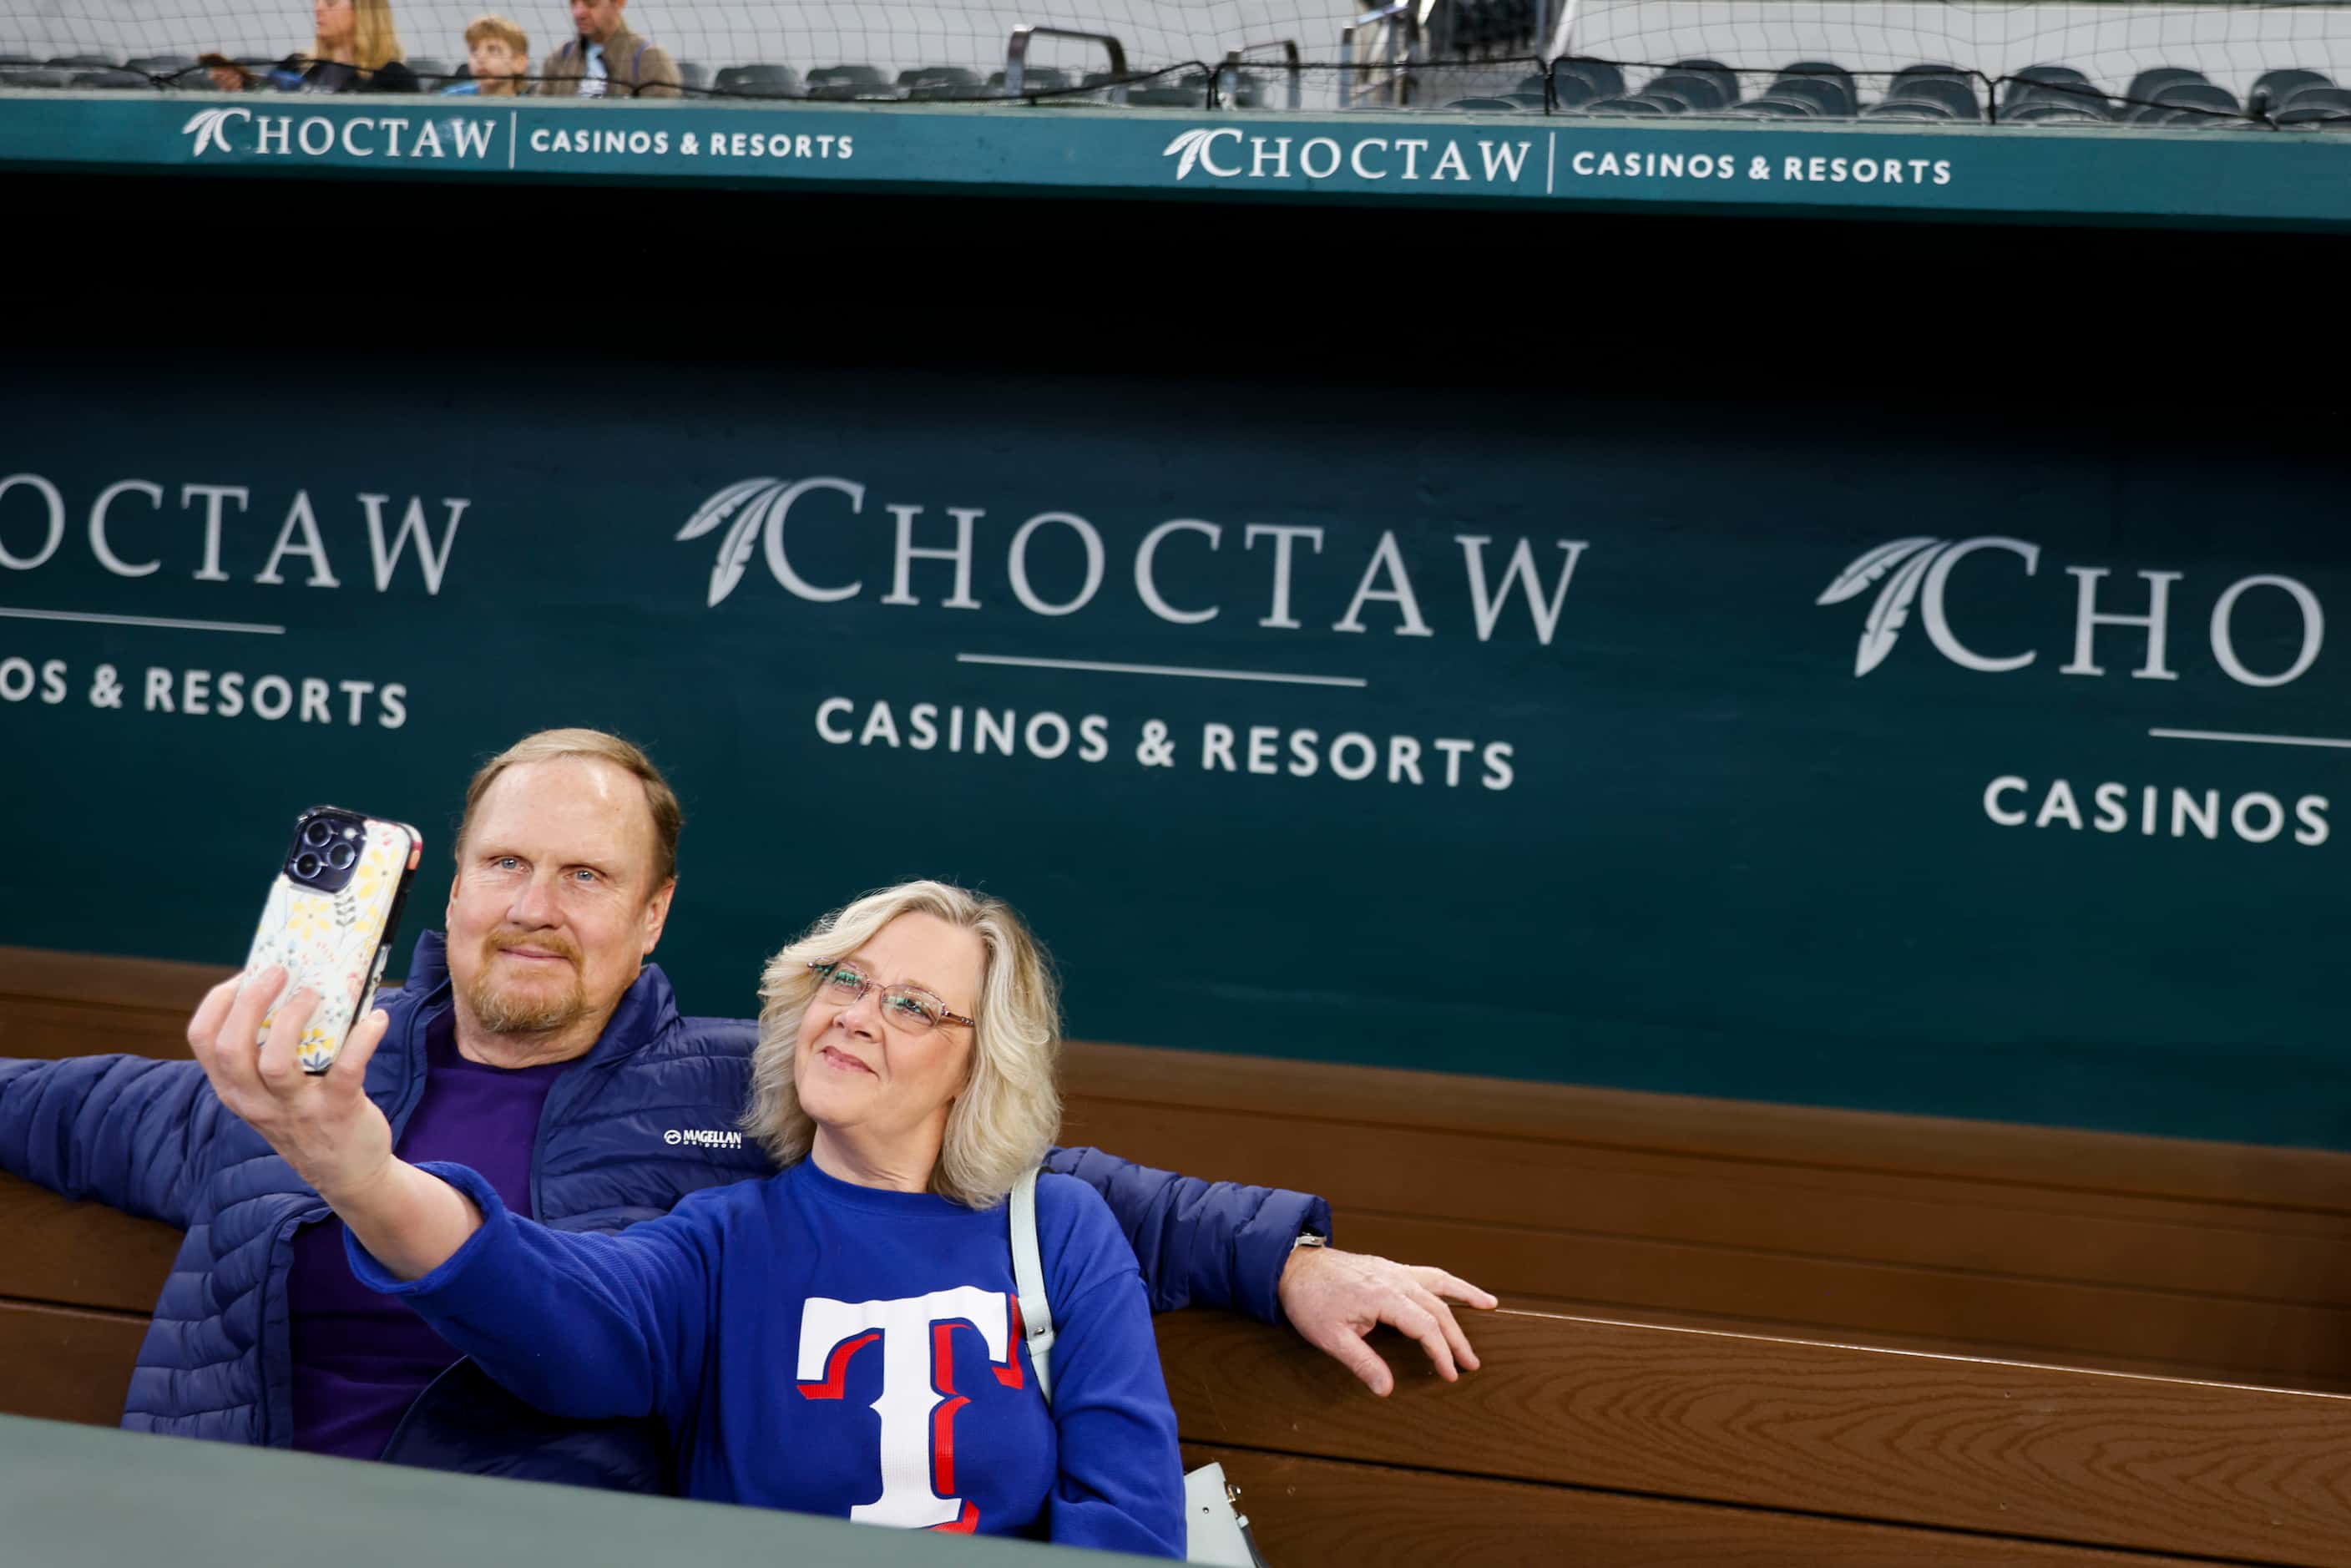 Cindy McCoy (right) takes a selfie with Randy Laster of Ft. Worth while sitting in the...